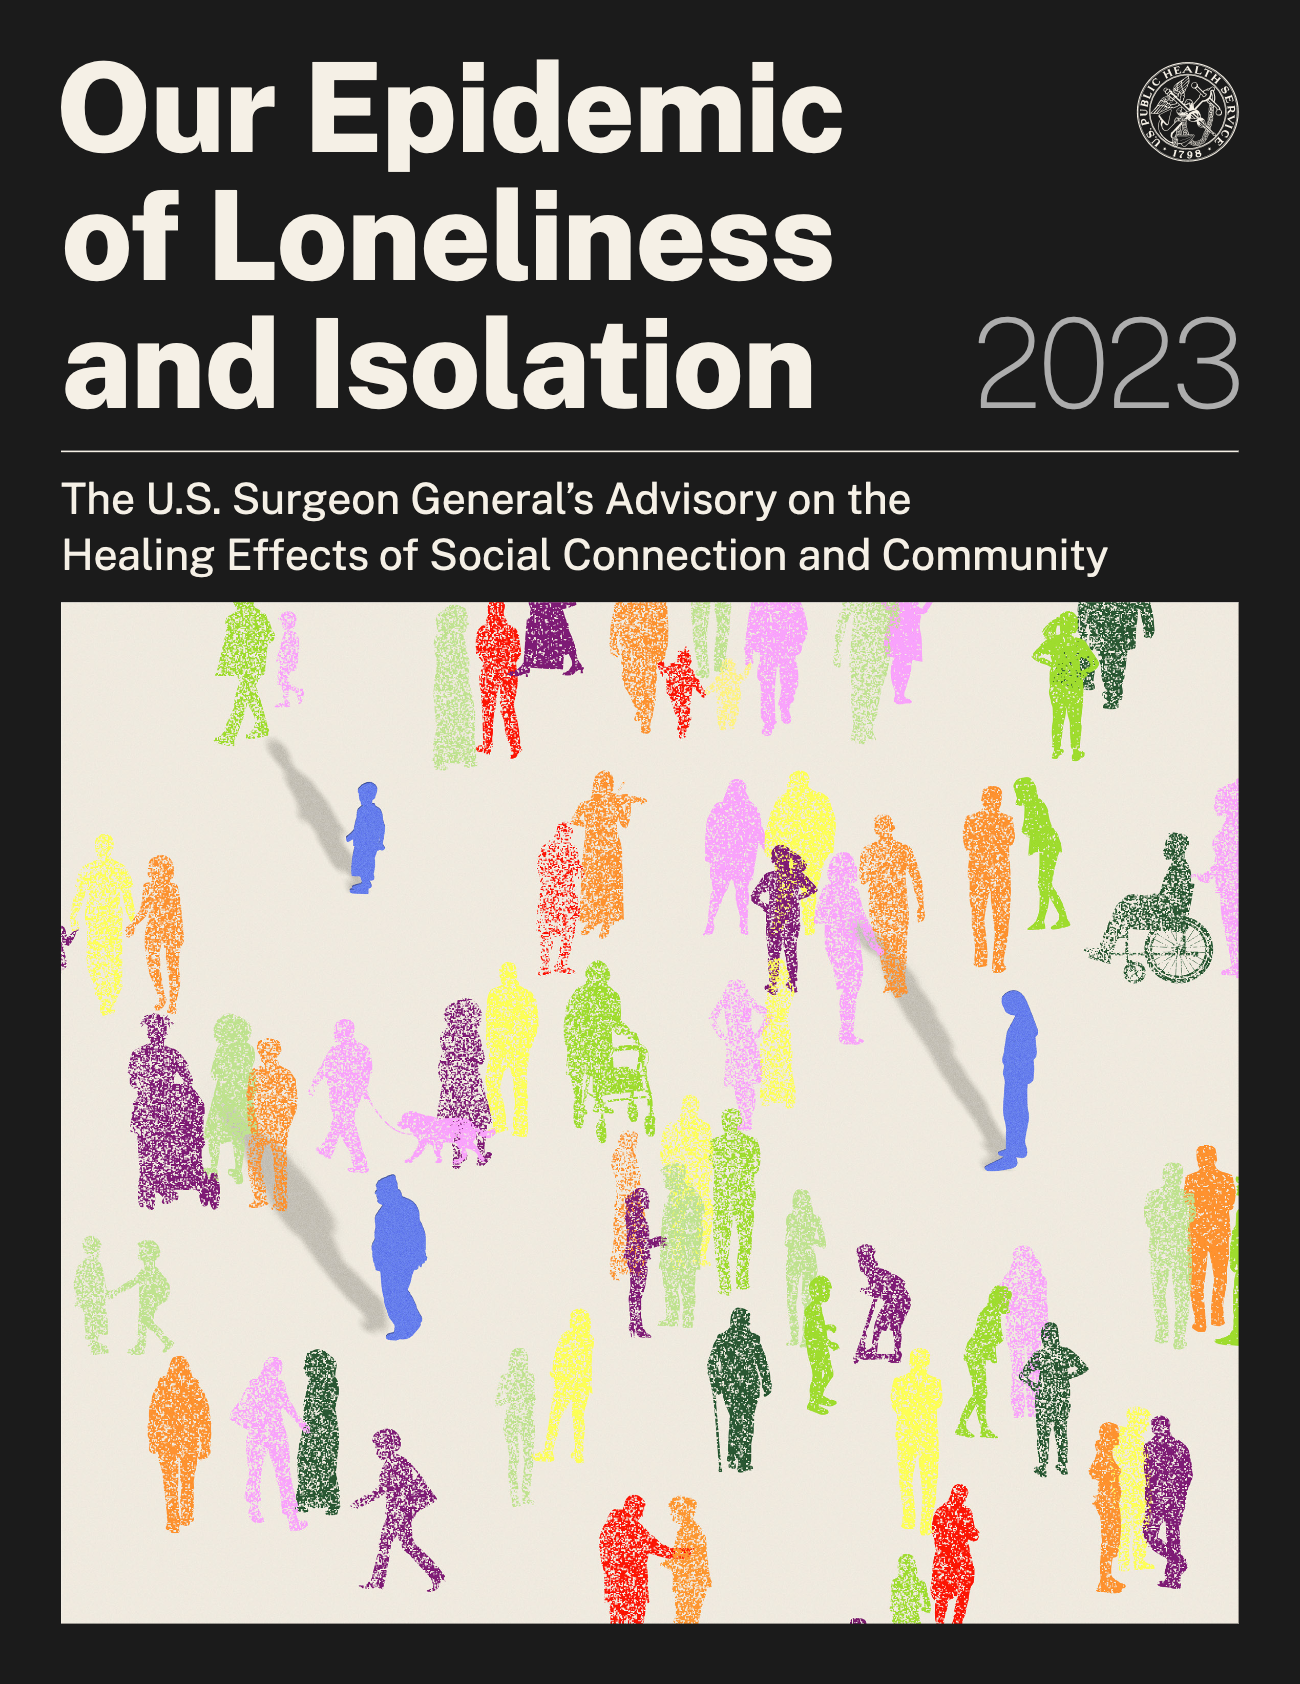 The cover of the Surgeon General's Advisory on the Healing Effects of Social Connection and Community, featuring a stylized design of human silhouettes in speckled colors.